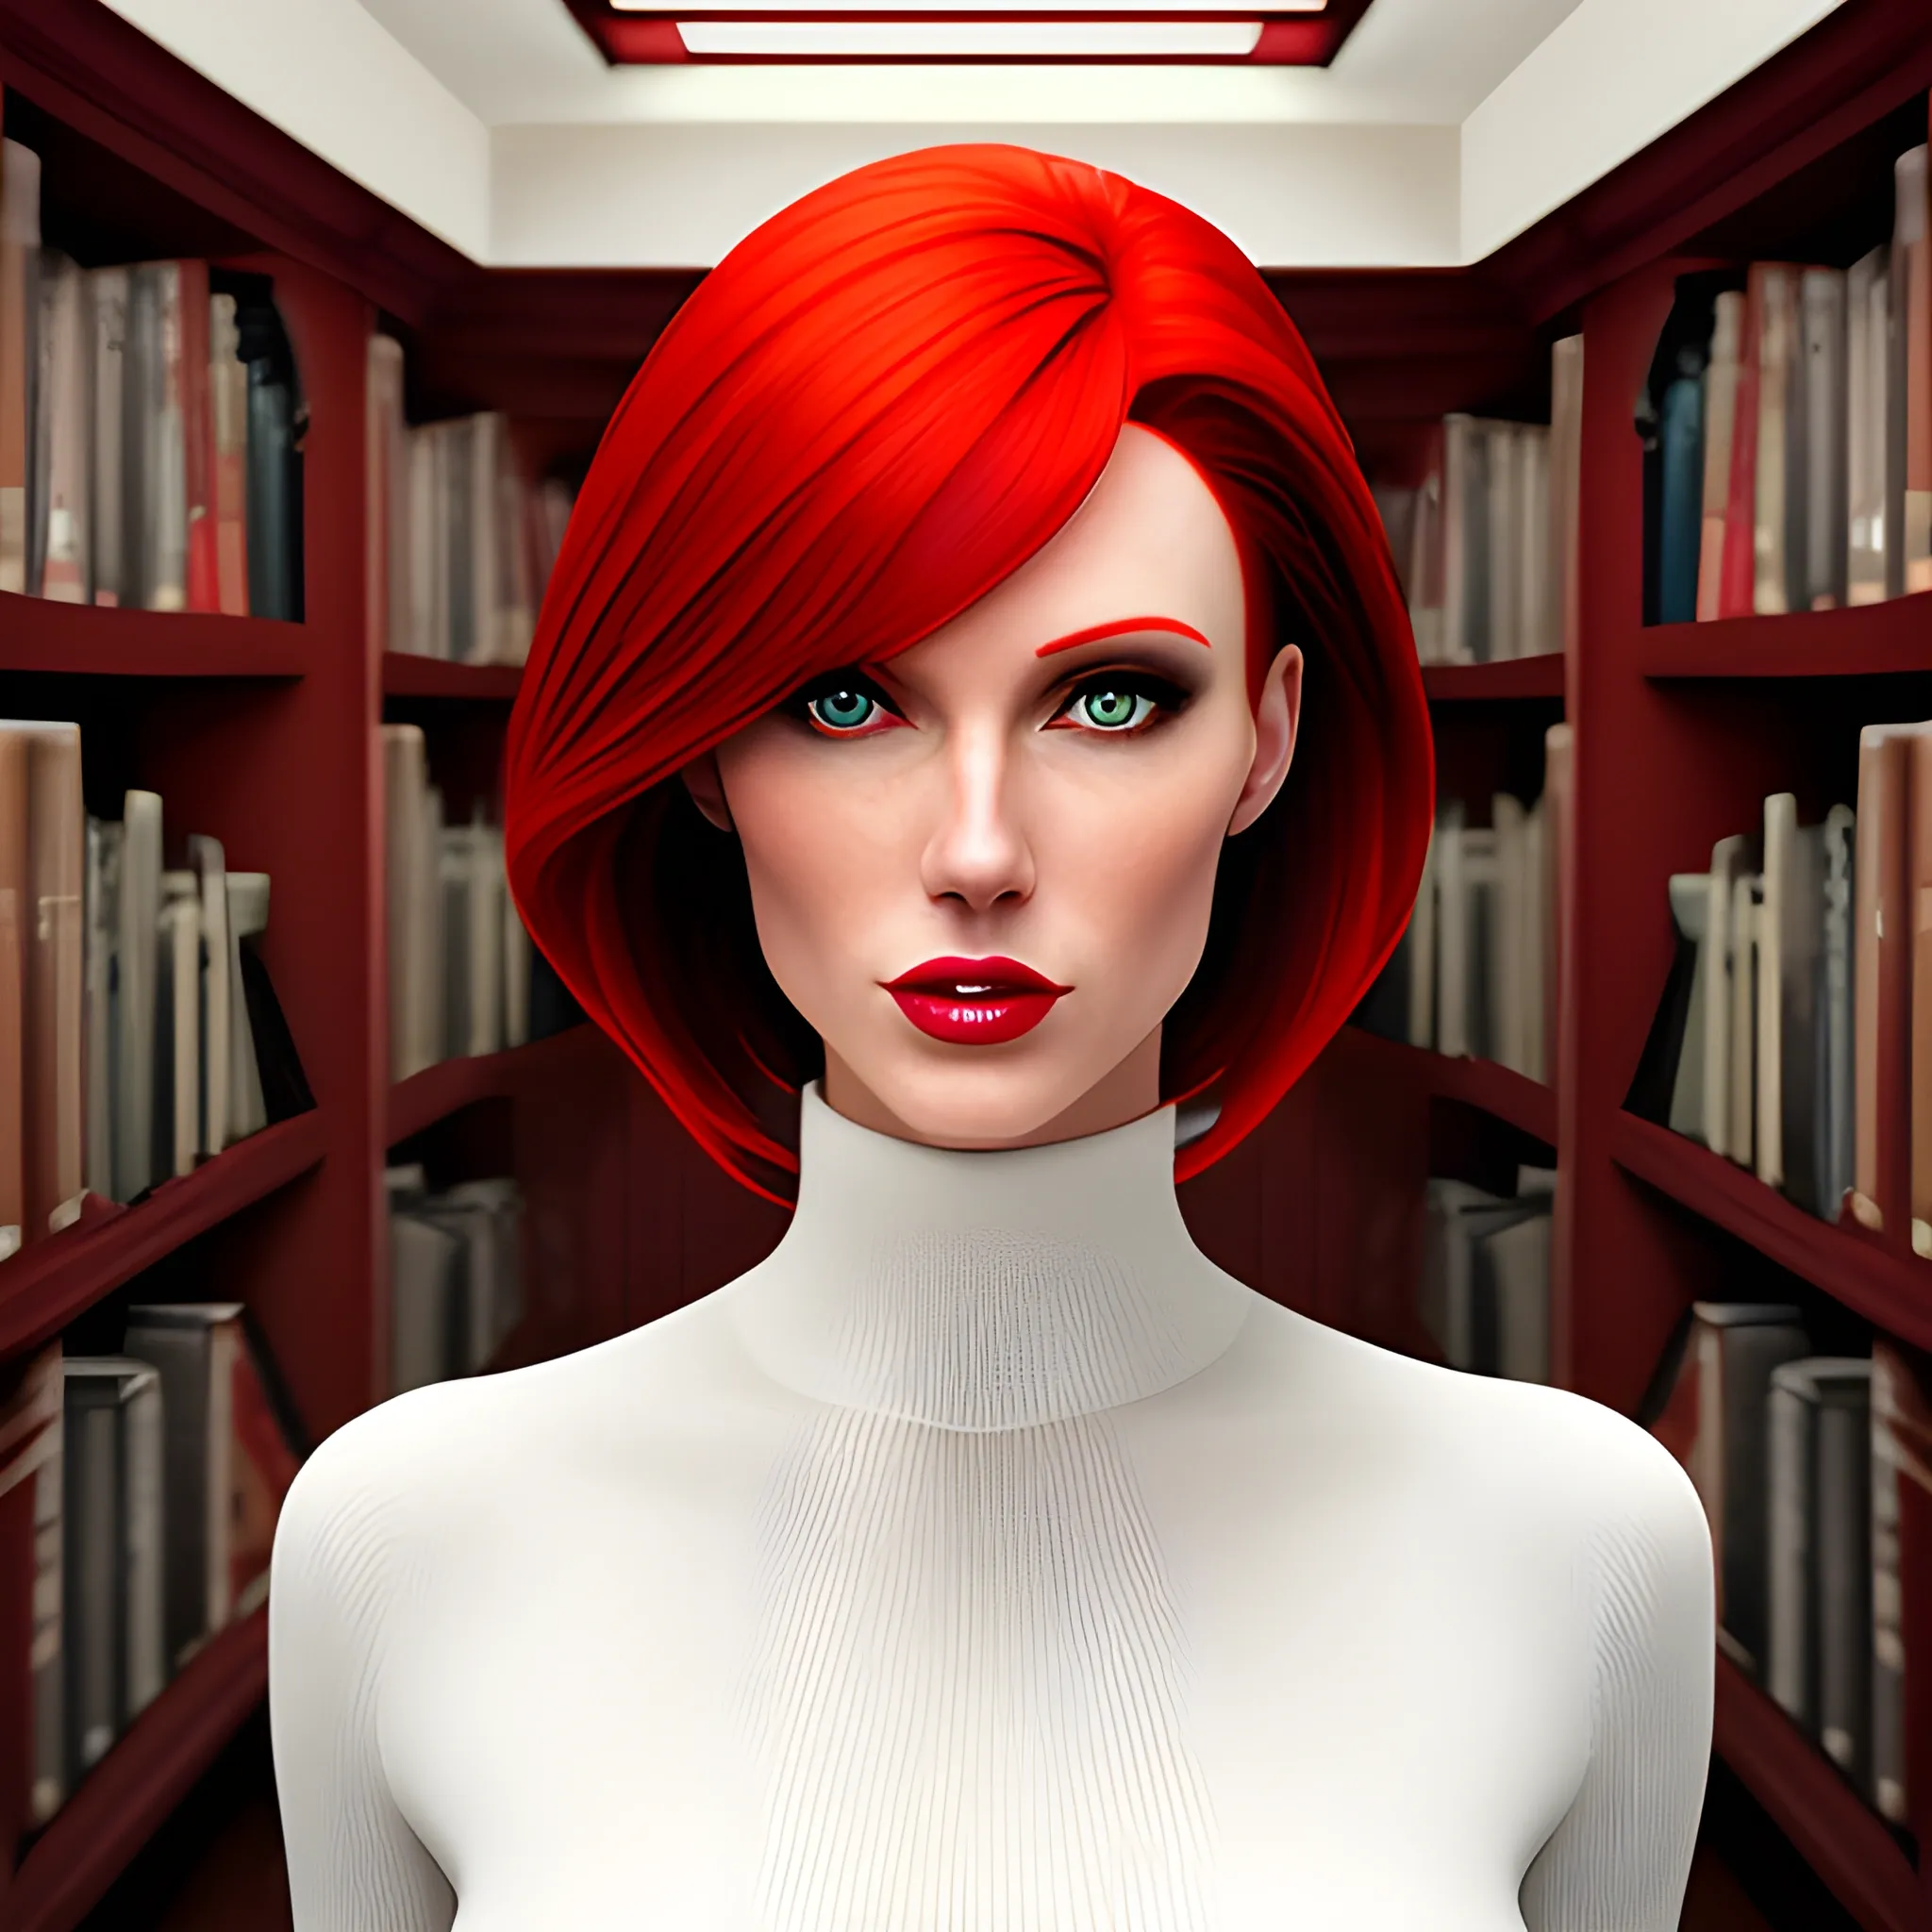 Create a photorealistic image of a red-haired female child with and a red turtleneck with a cutout in it's center, standing in a library. Pretty eyes, sexy mouth, whole body visible, lots of skin, maximum details